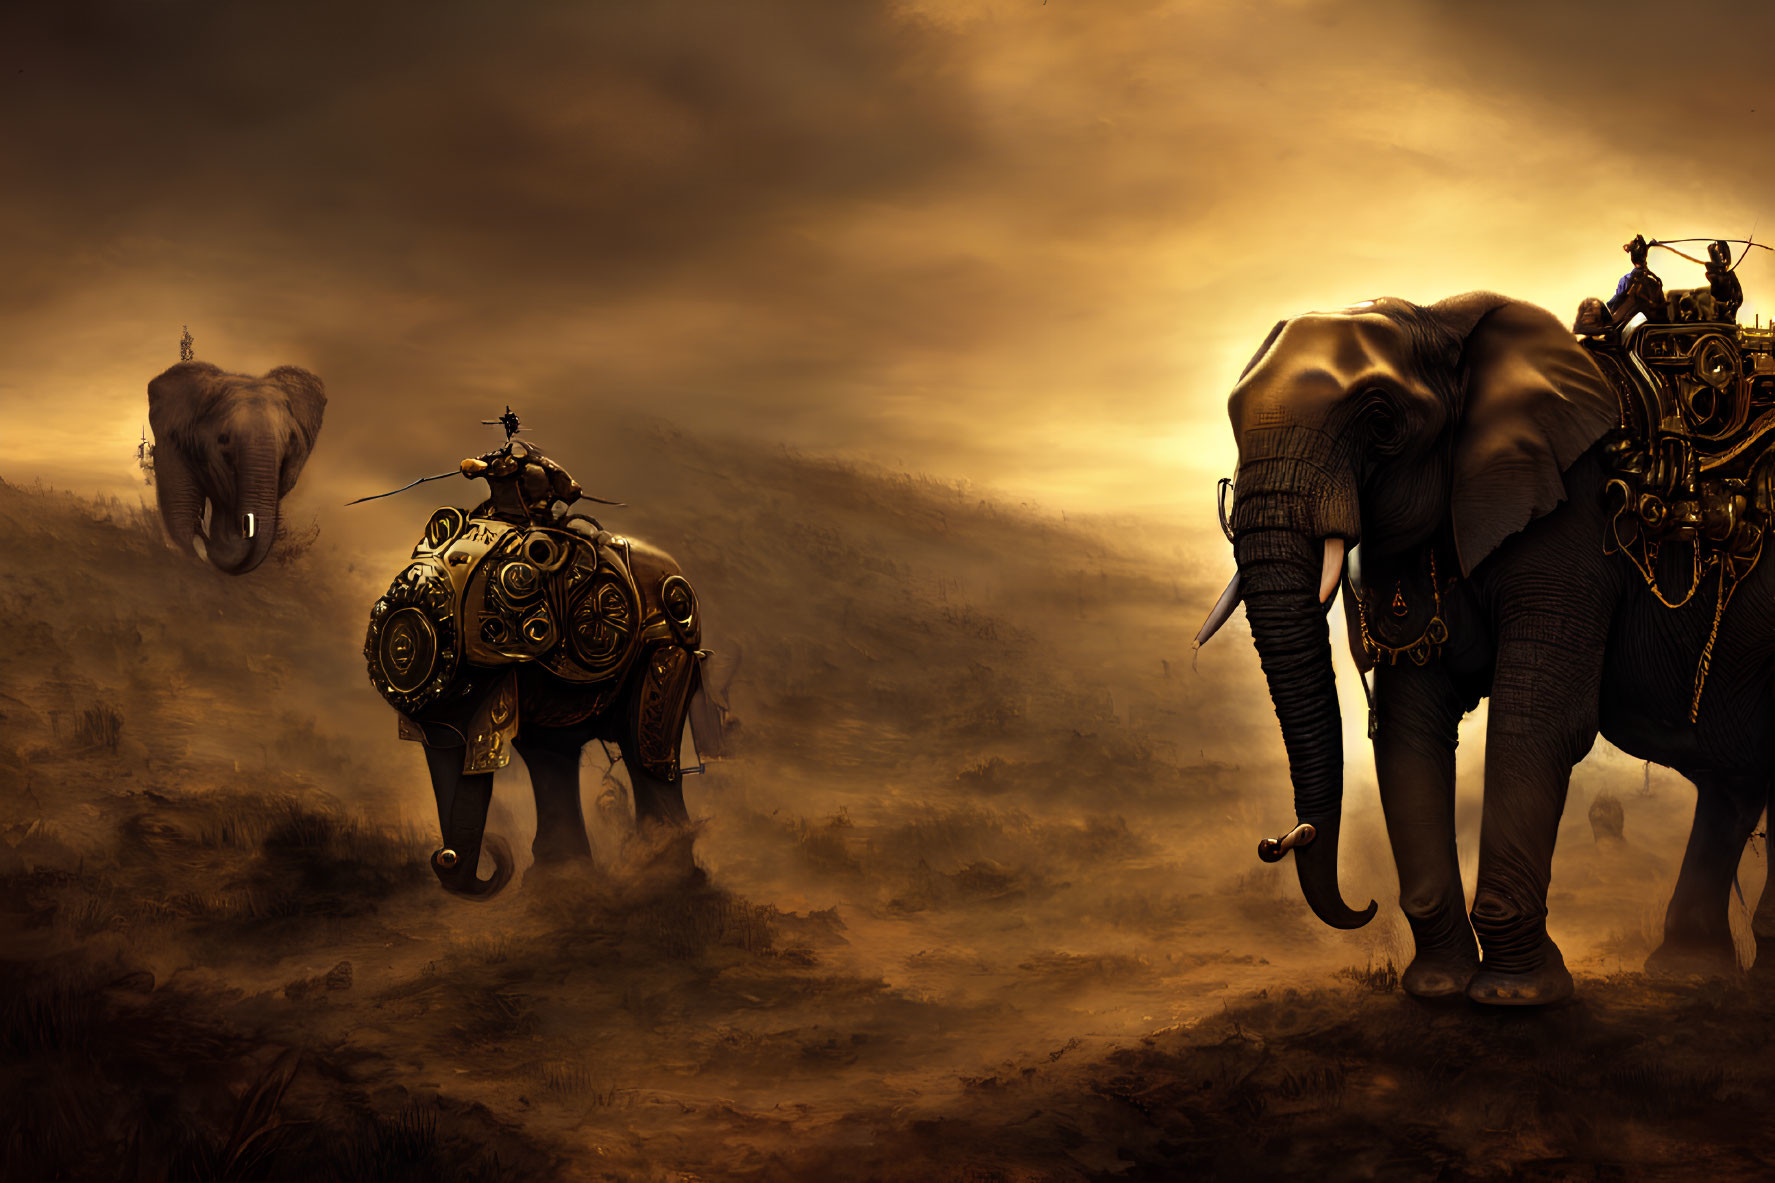 Surreal natural vs. steampunk elephant under dramatic sky